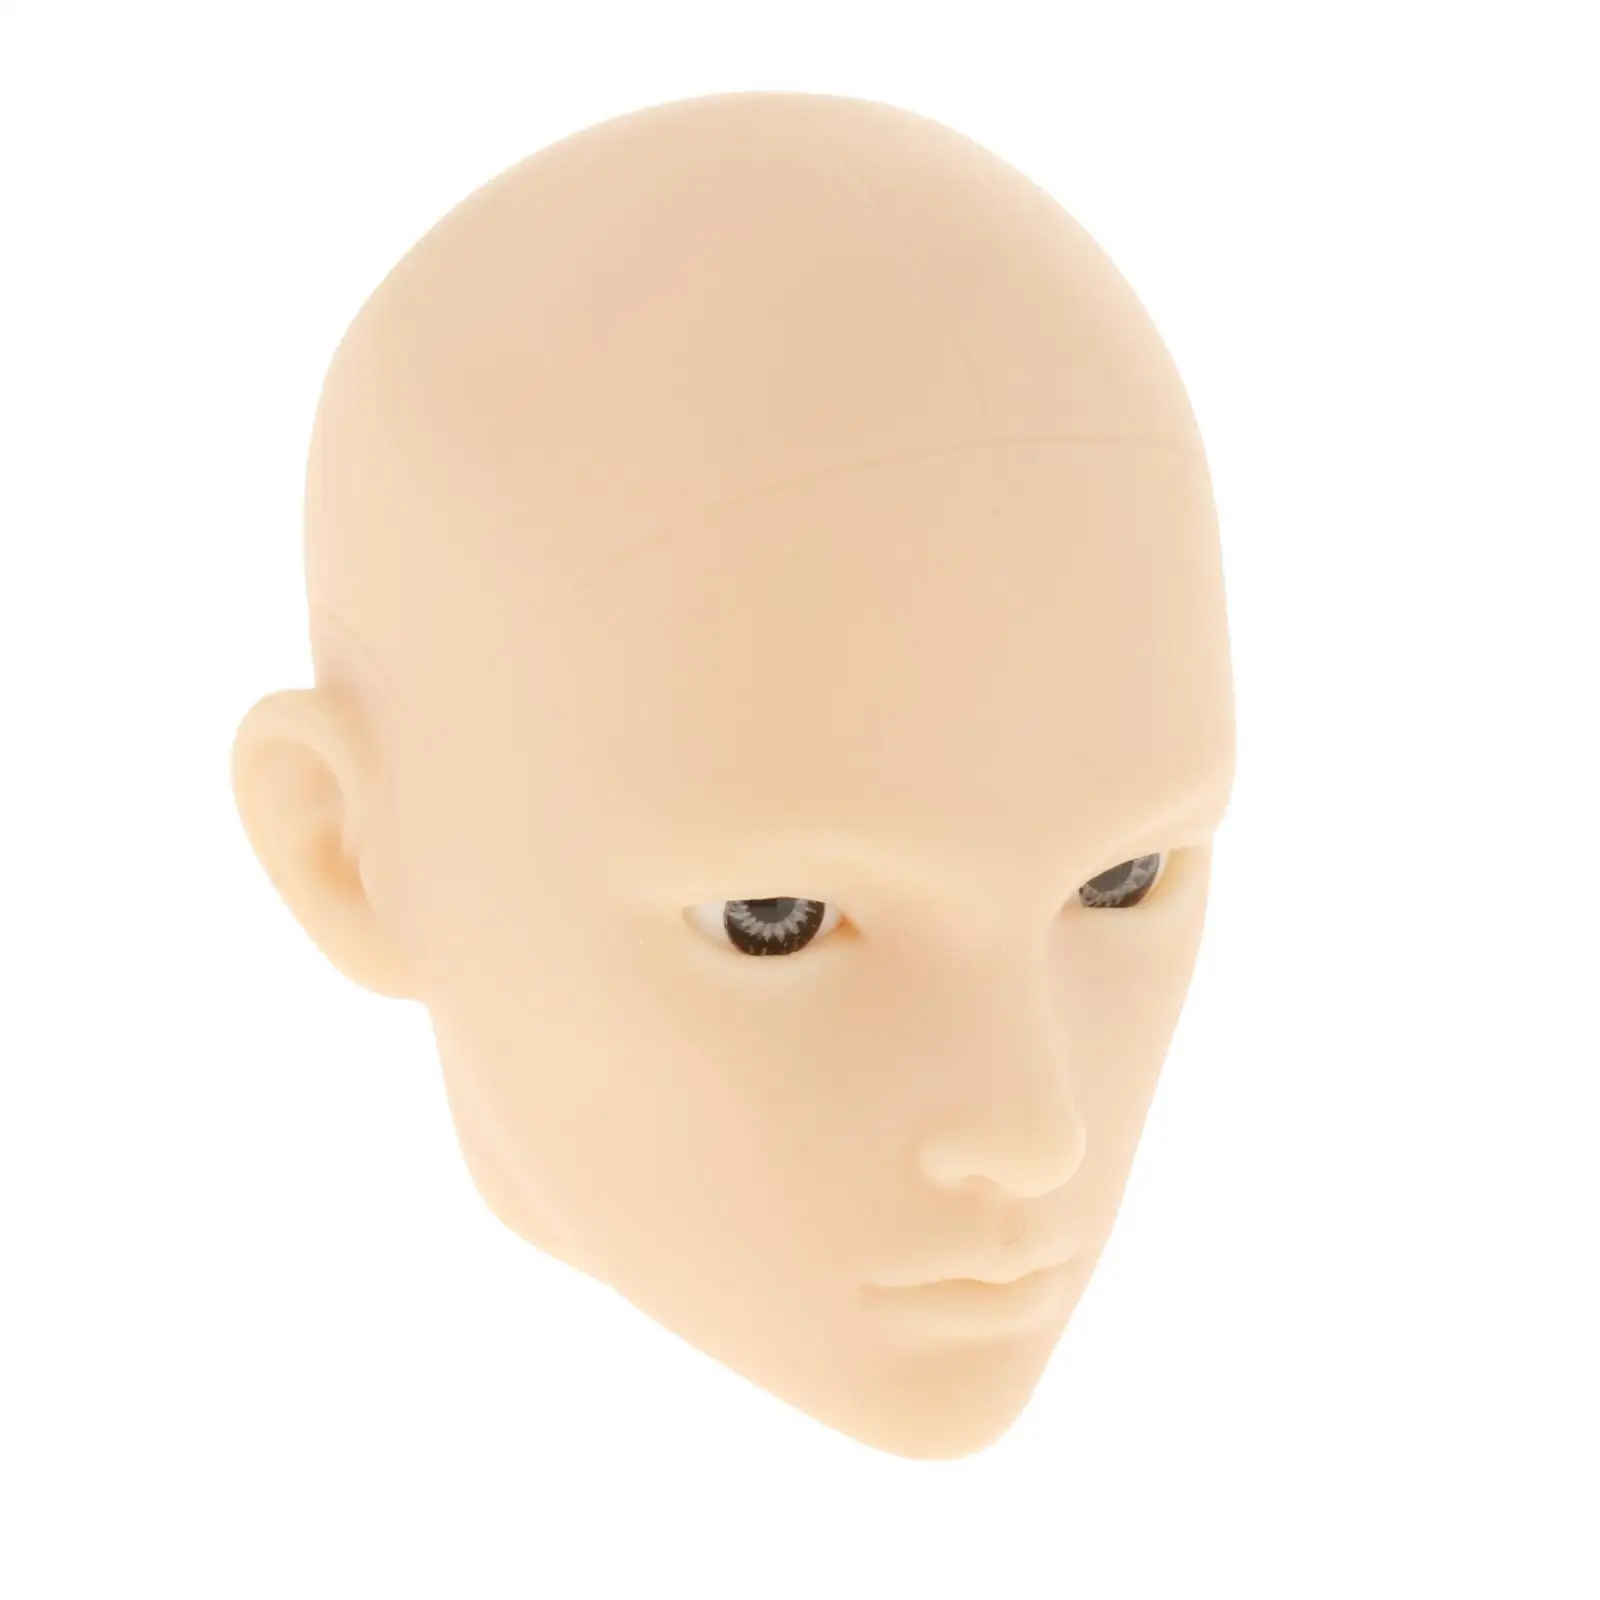 PVC 1/6  Doll Head Mold with Grey Eyes Replacements Repair Accessory